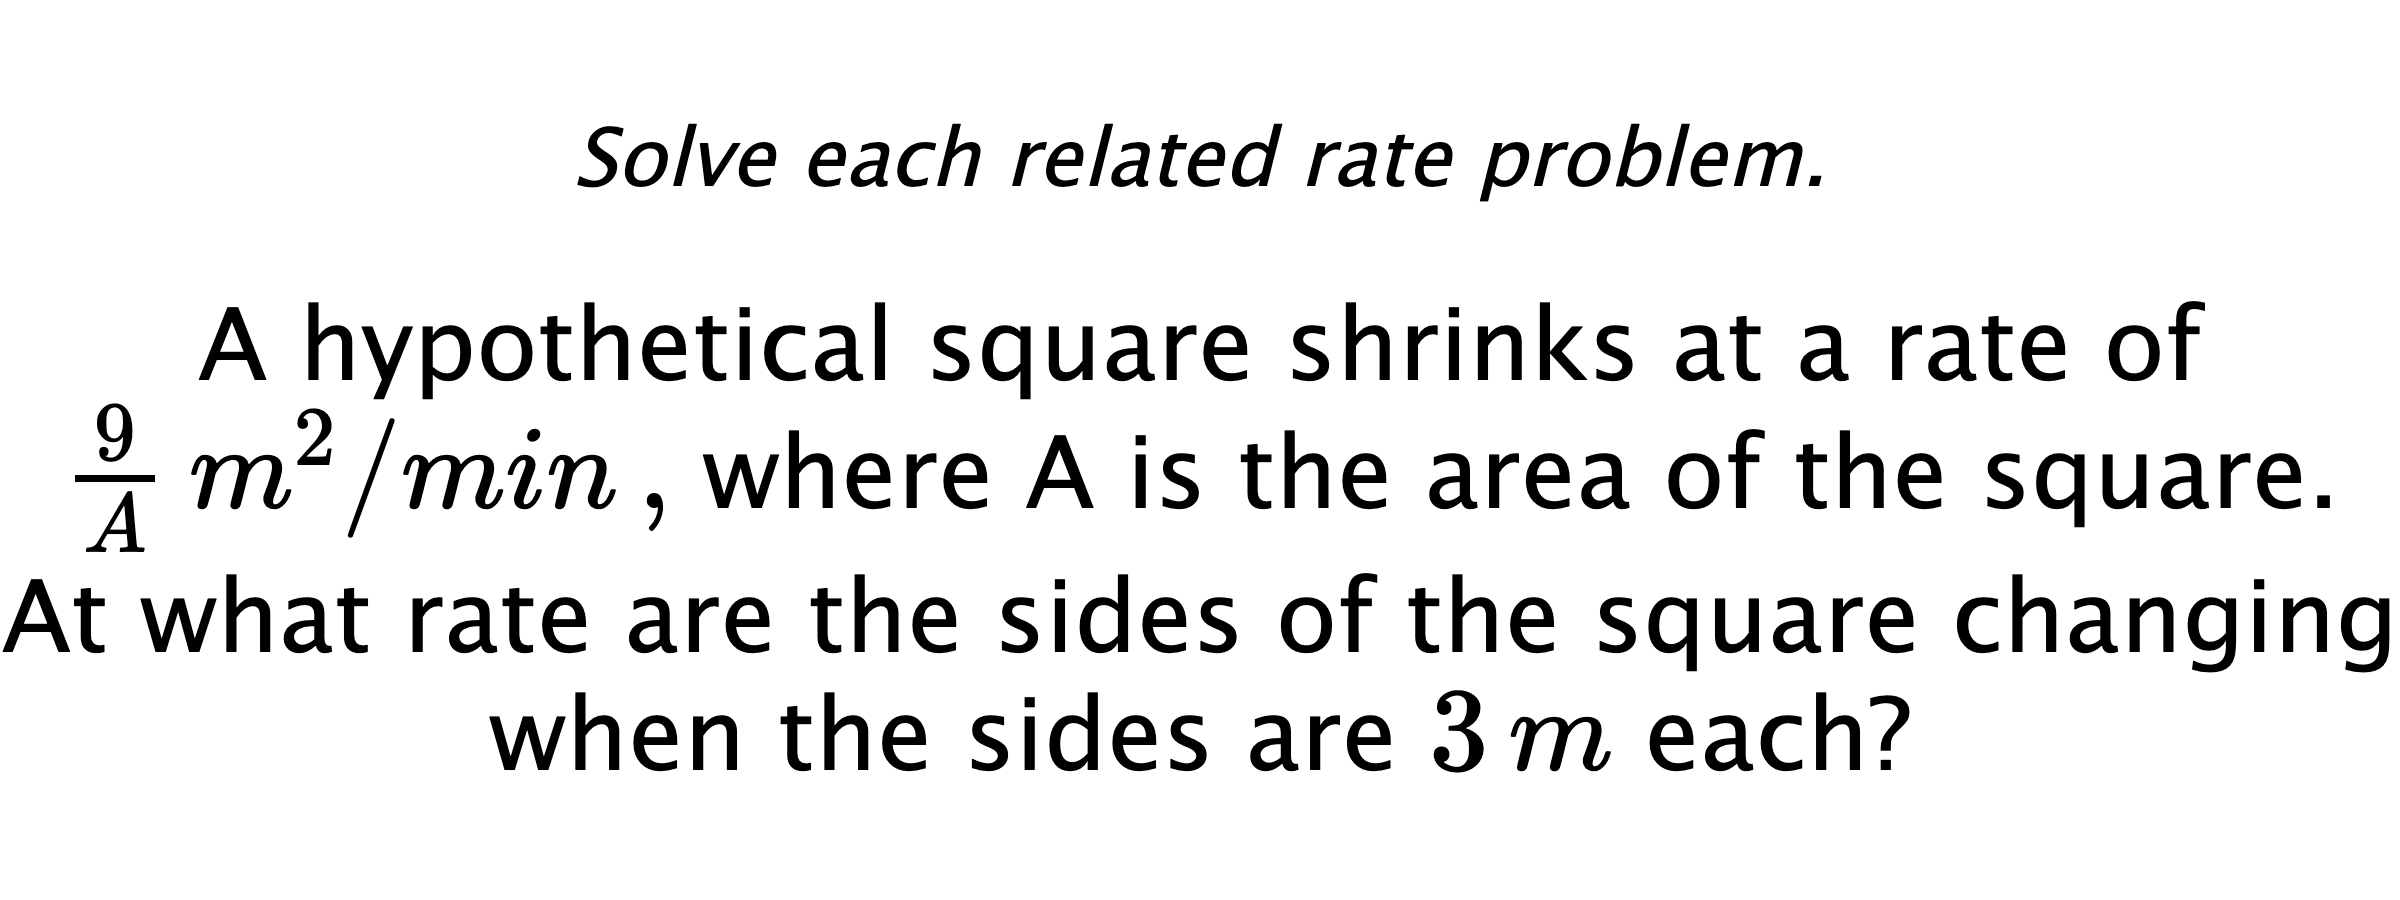 Solve each related rate problem. A hypothetical square shrinks at a rate of $\frac{9}{A}\,m^{2}/min \, ,$ where A is the area of the square. At what rate are the sides of the square changing when the sides are $3\,m$ each?